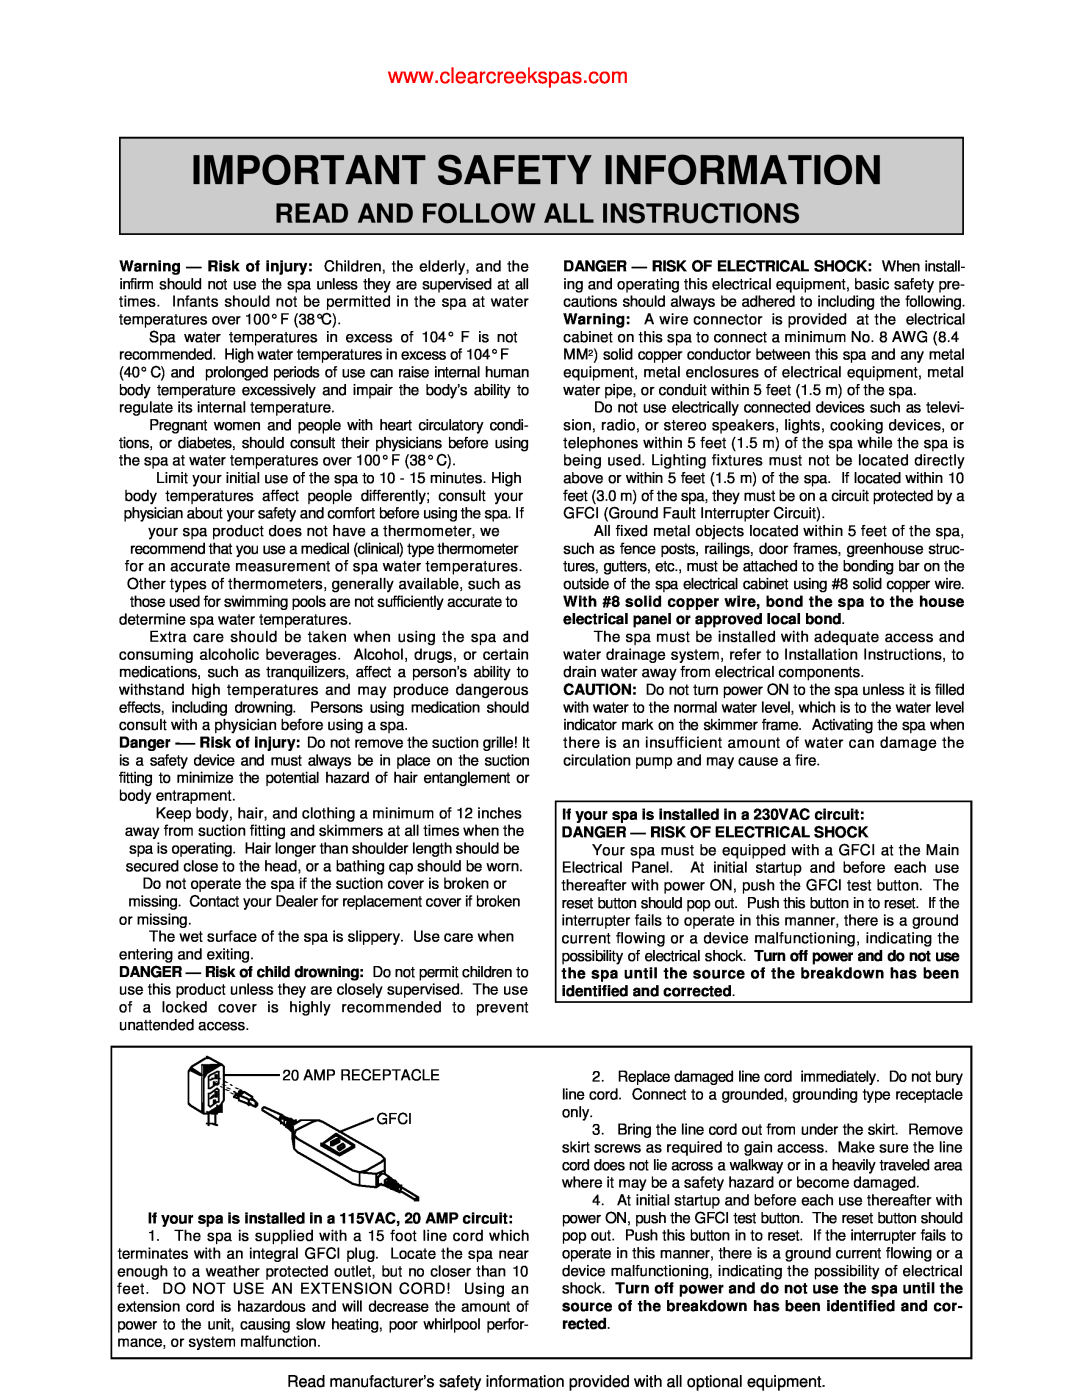 Jacuzzi Whirlpool Spa Important Safety Information, Read And Follow All Instructions, Danger - Risk Of Electrical Shock 